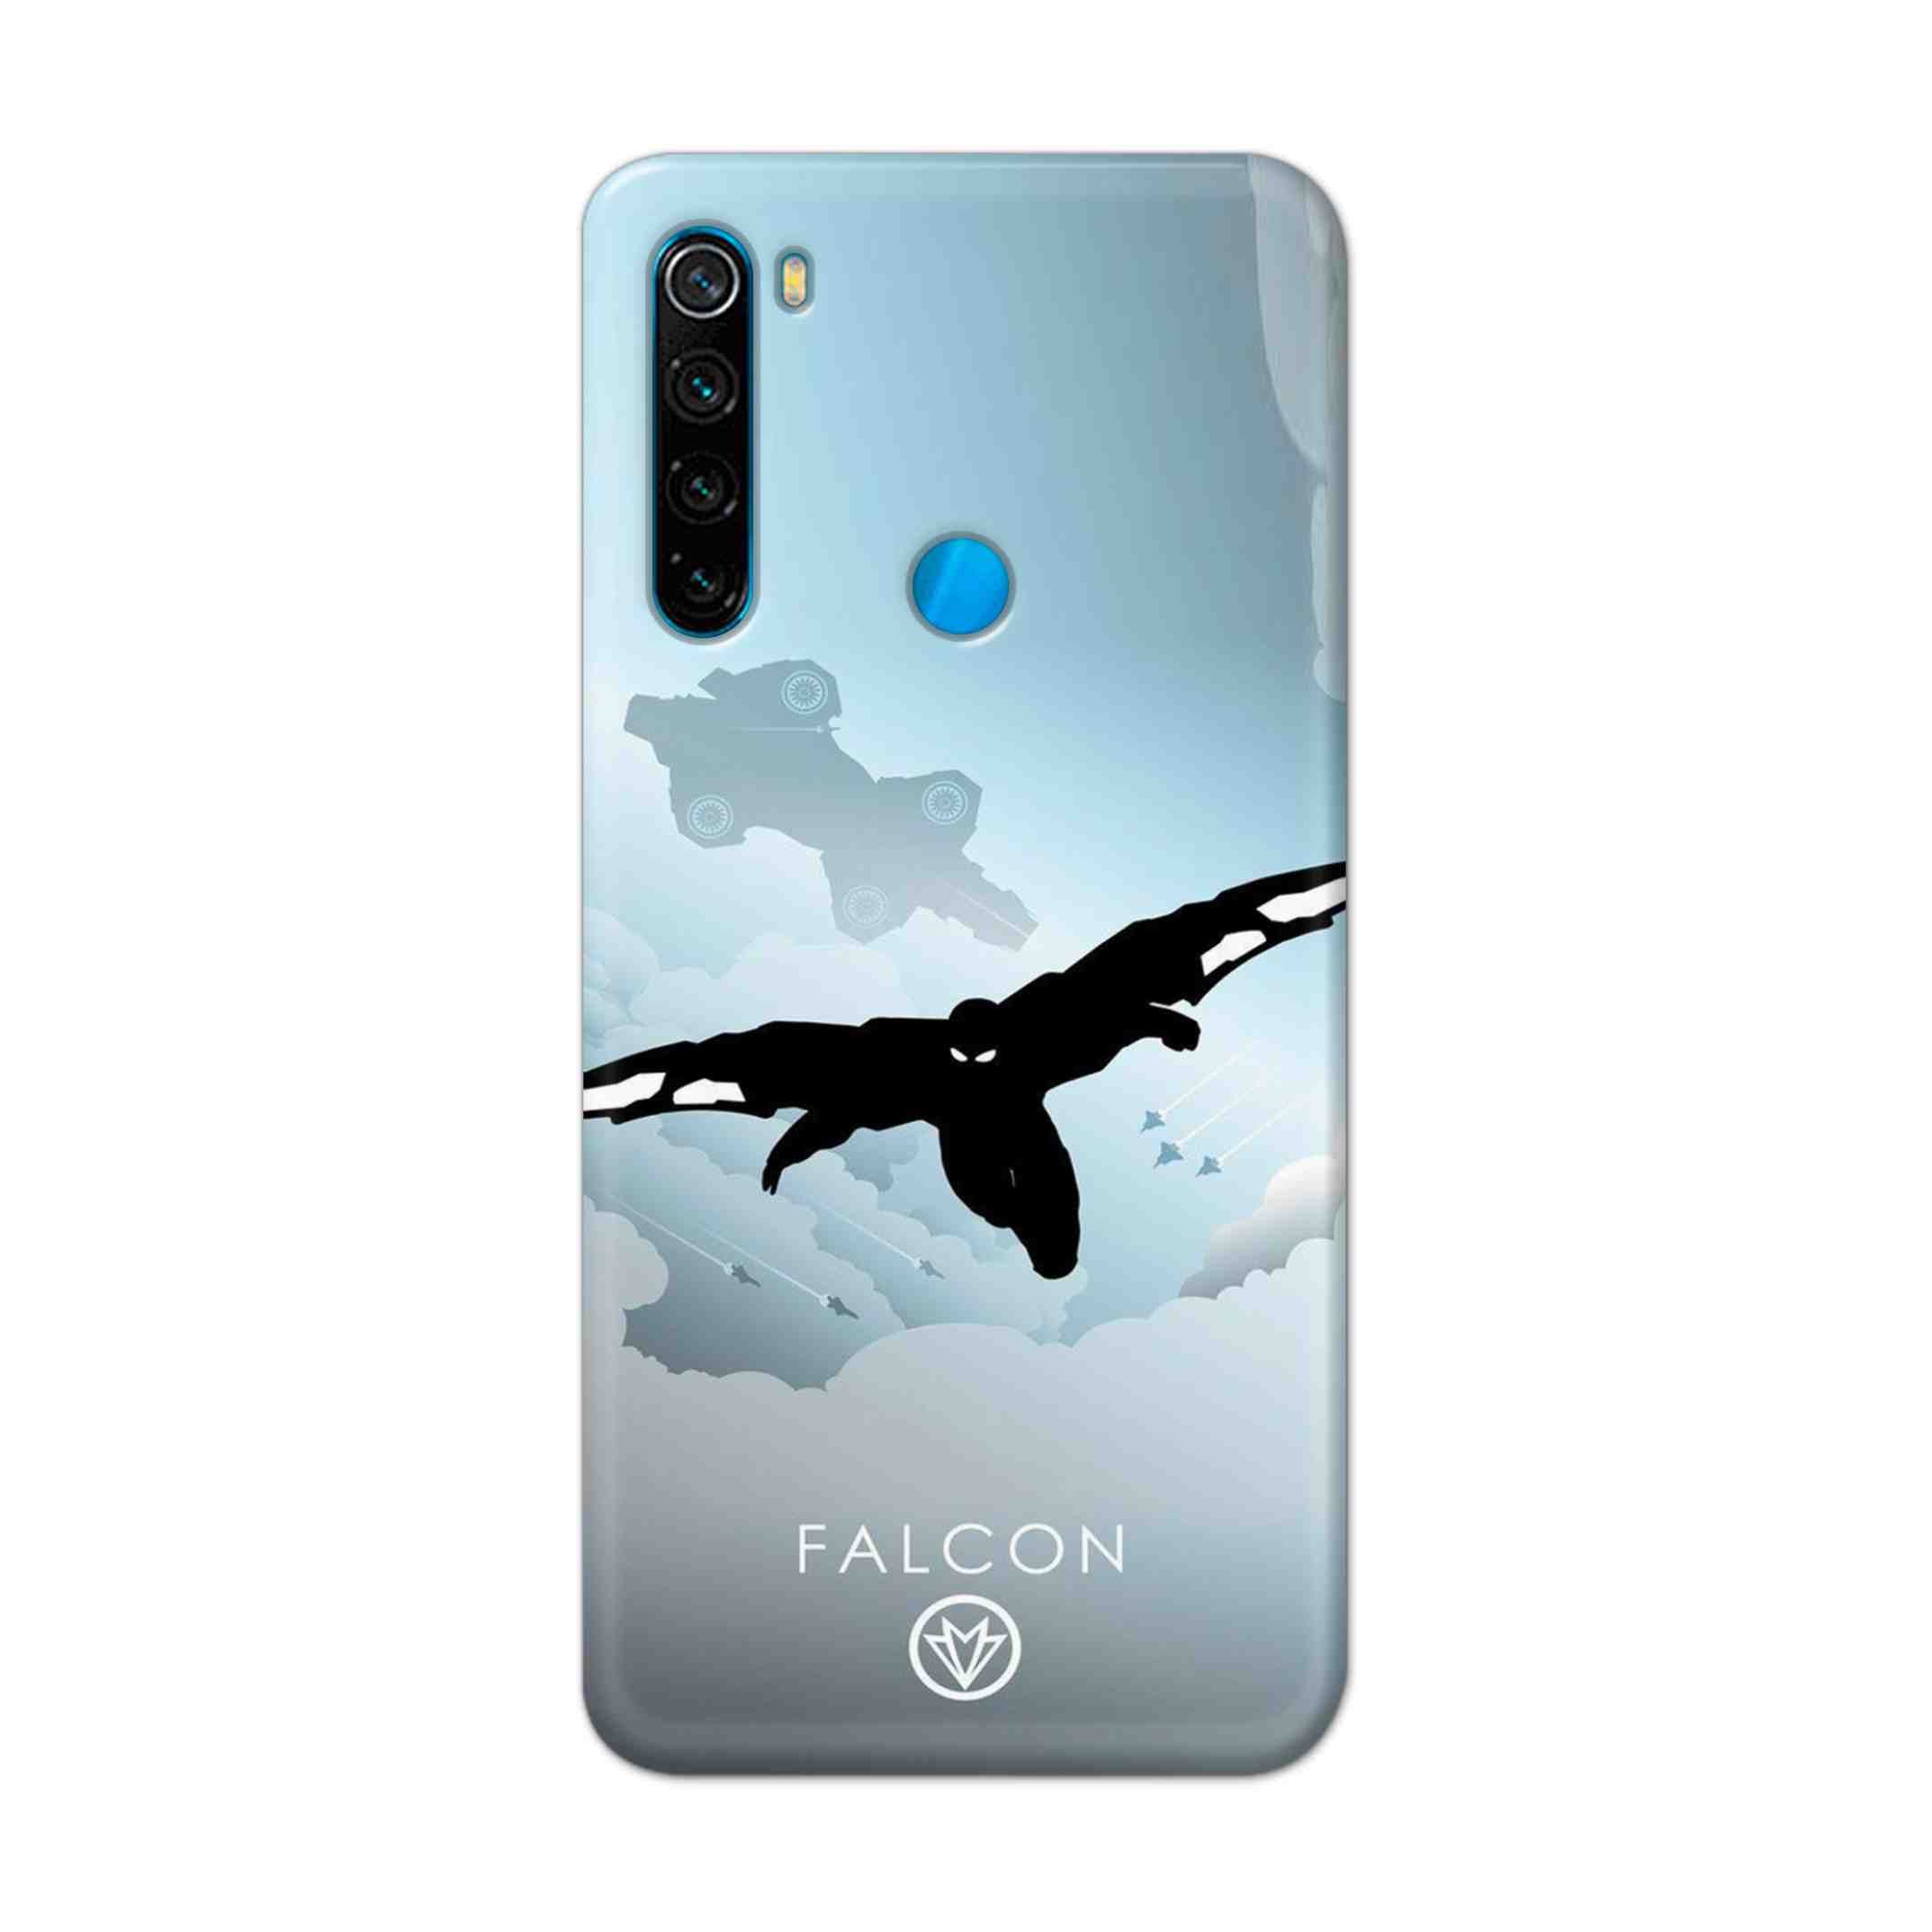 Buy Falcon Hard Back Mobile Phone Case Cover For Xiaomi Redmi Note 8 Online